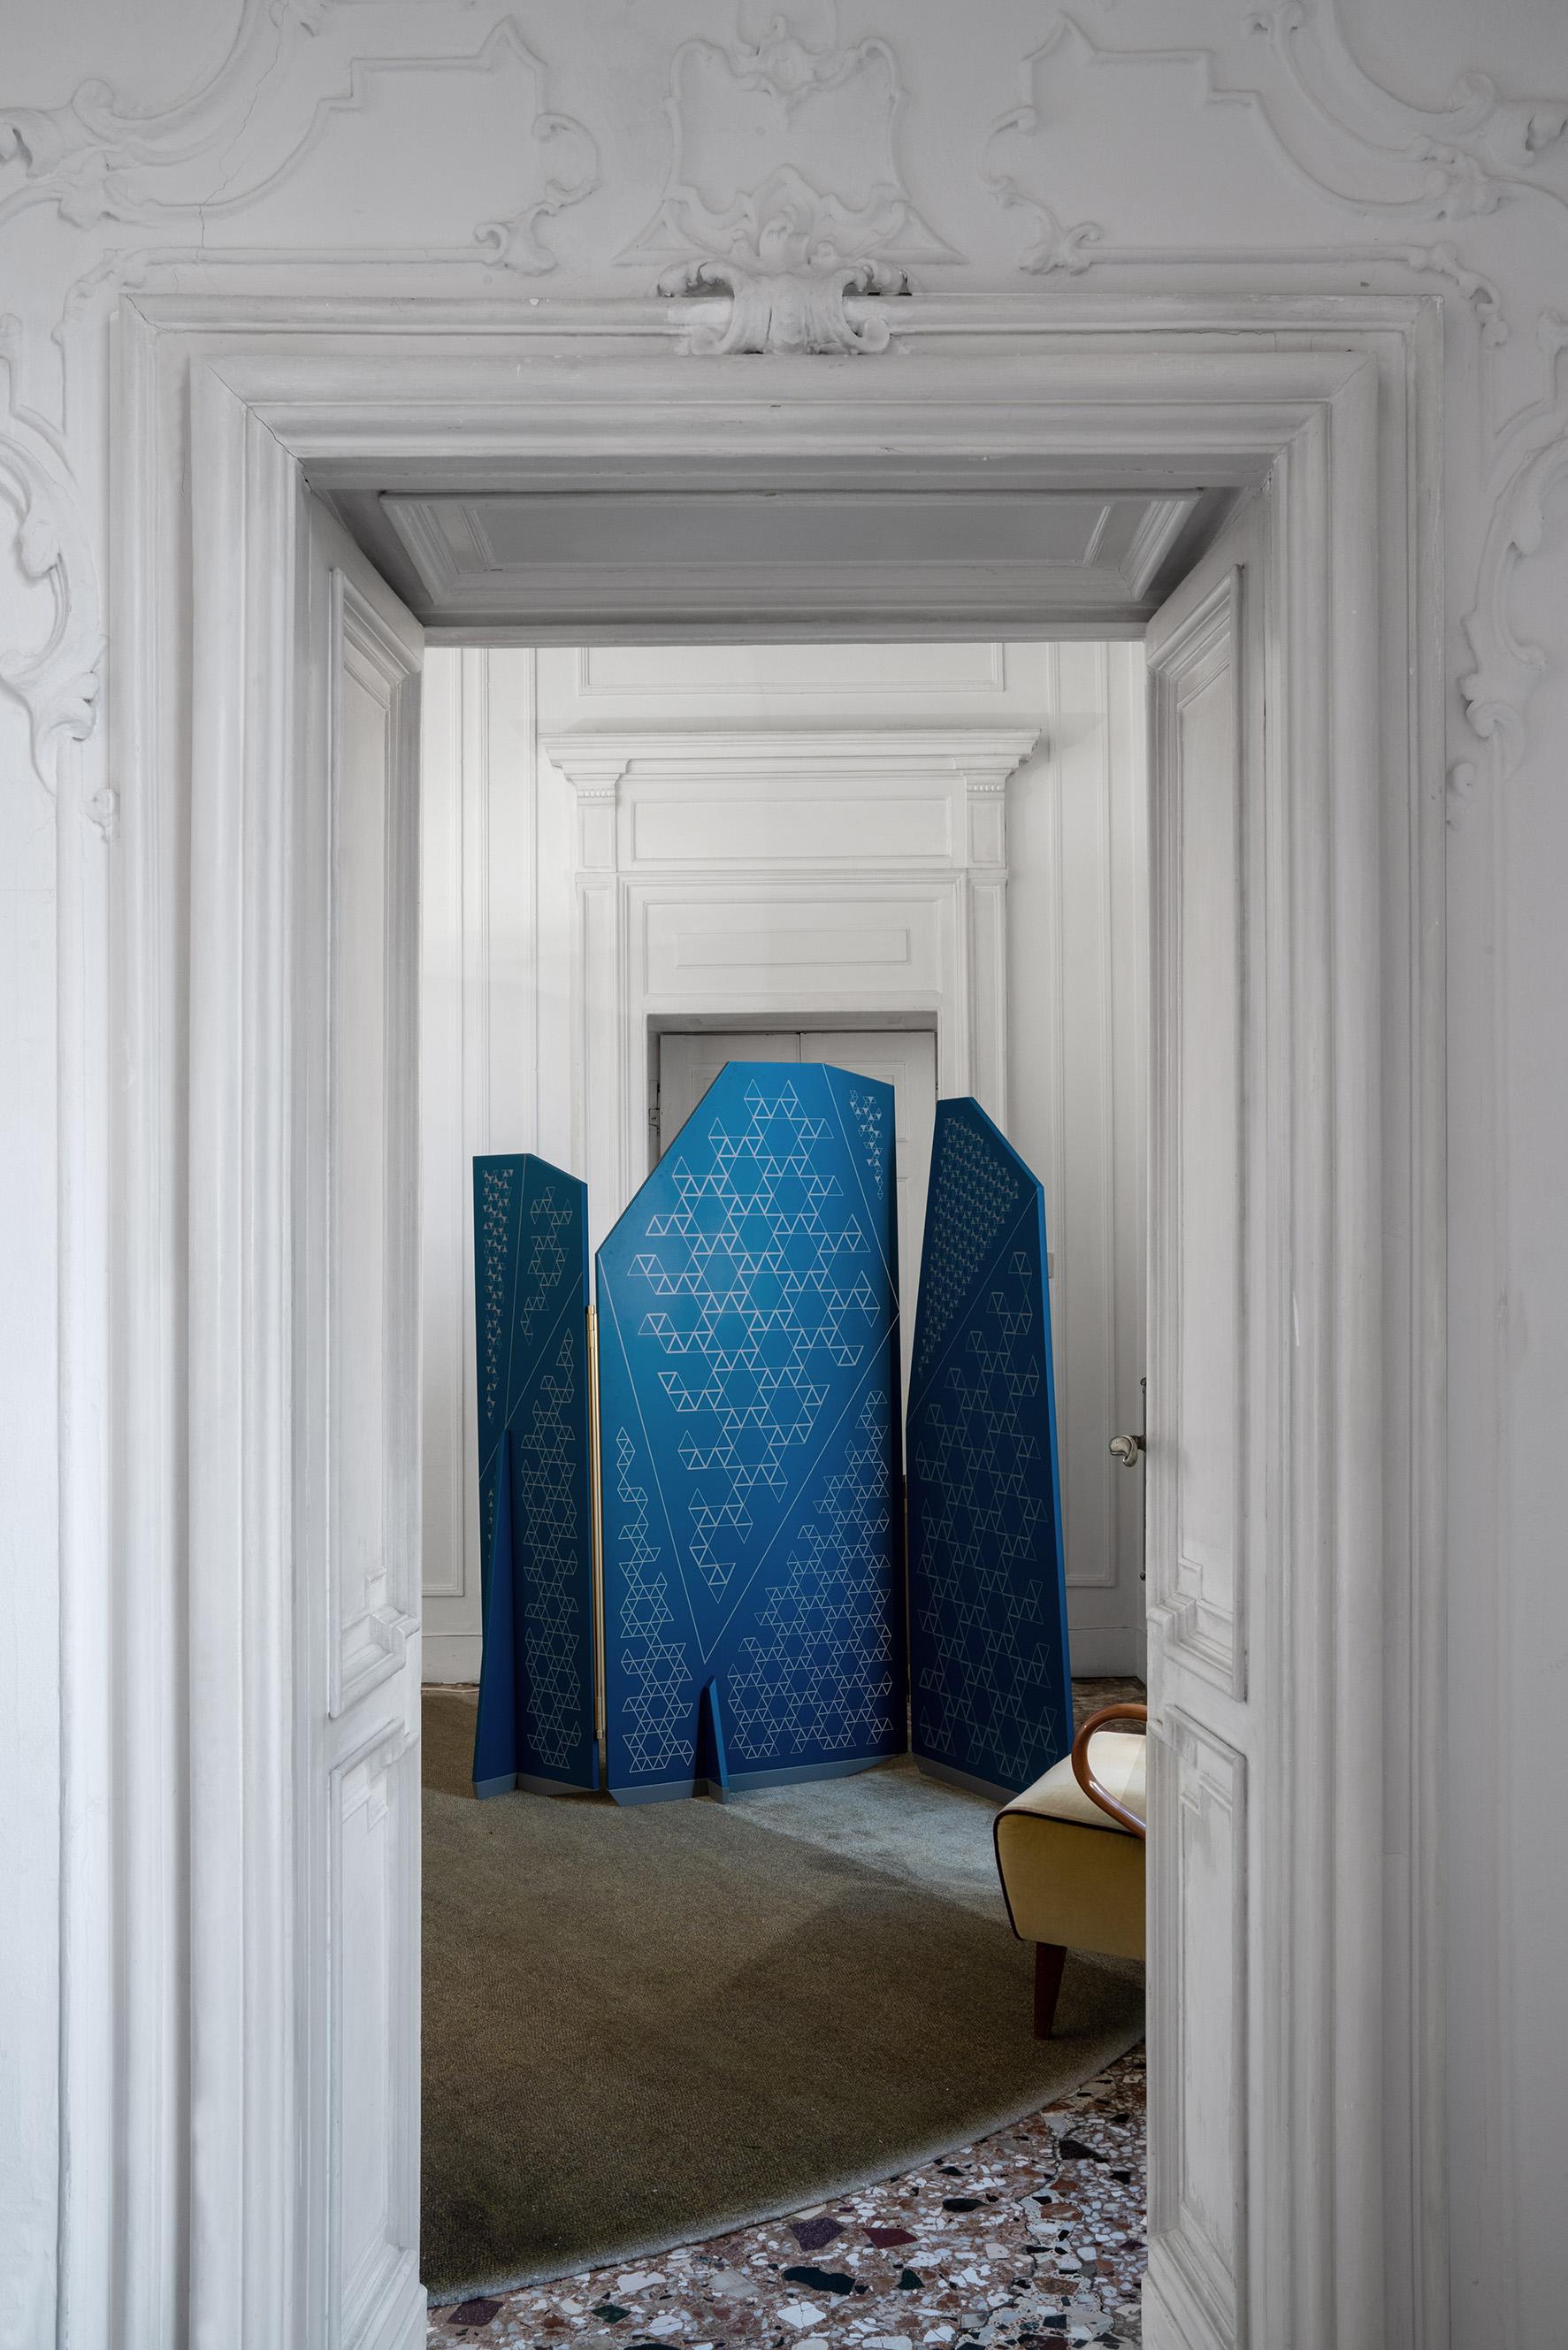 Green teal blue screen by Mentemano
Dimensions: W 196 x D 28 x H 181 cm
Materials: Green teal blue, grey print, black hinges

The hinges allow the structure to take different shapes.
The lacquered panels are enriched with digital prints giving